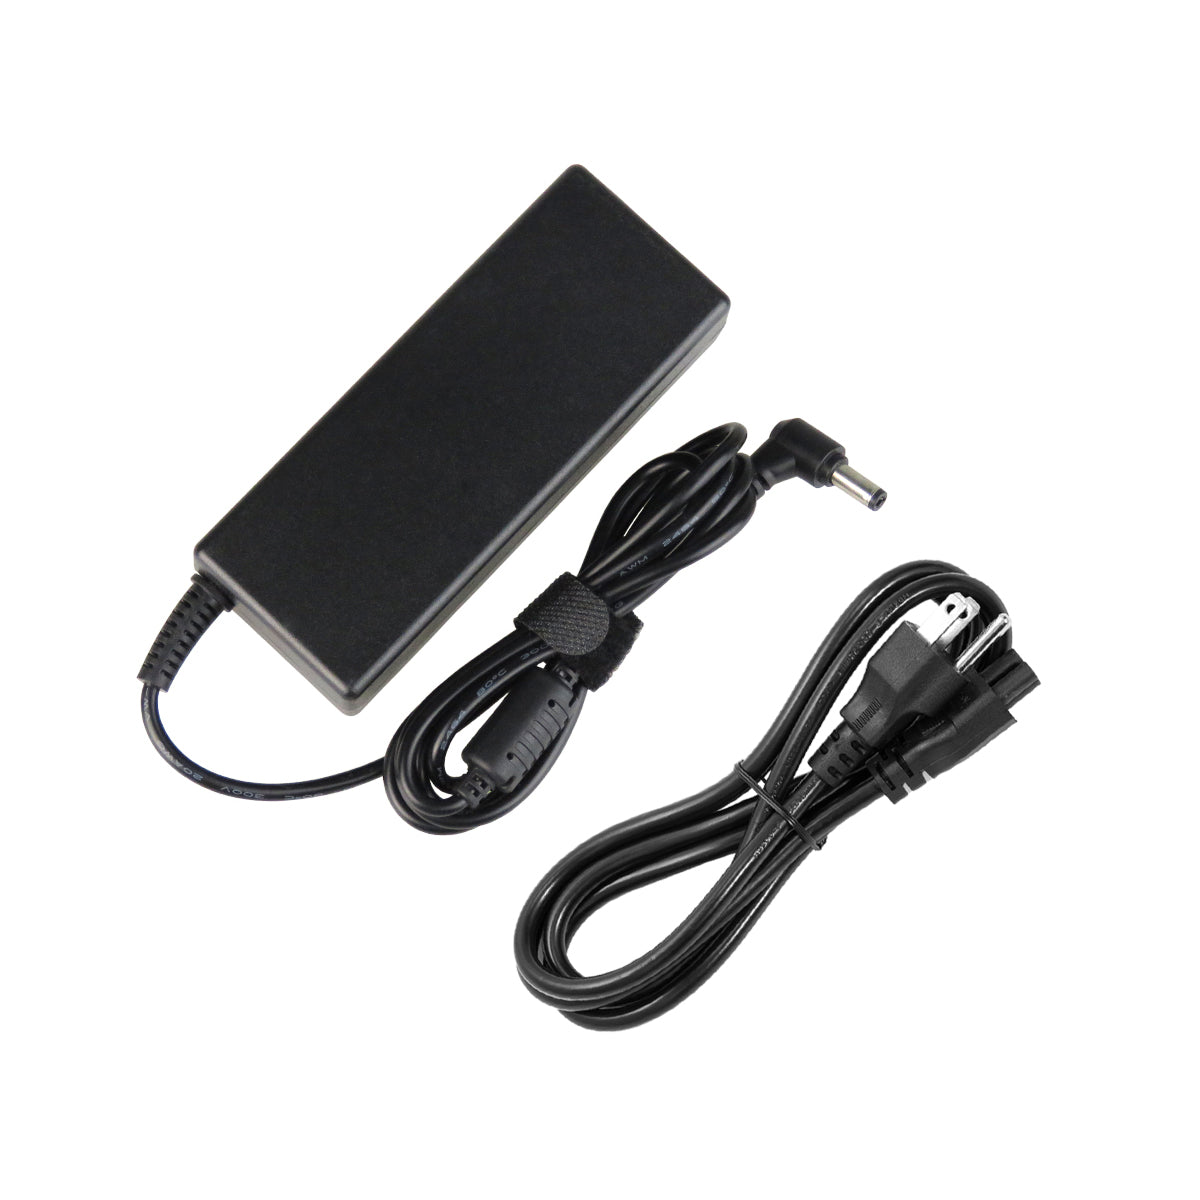 AC Adapter Charger for ASUS X54C-BBK24 Notebook.